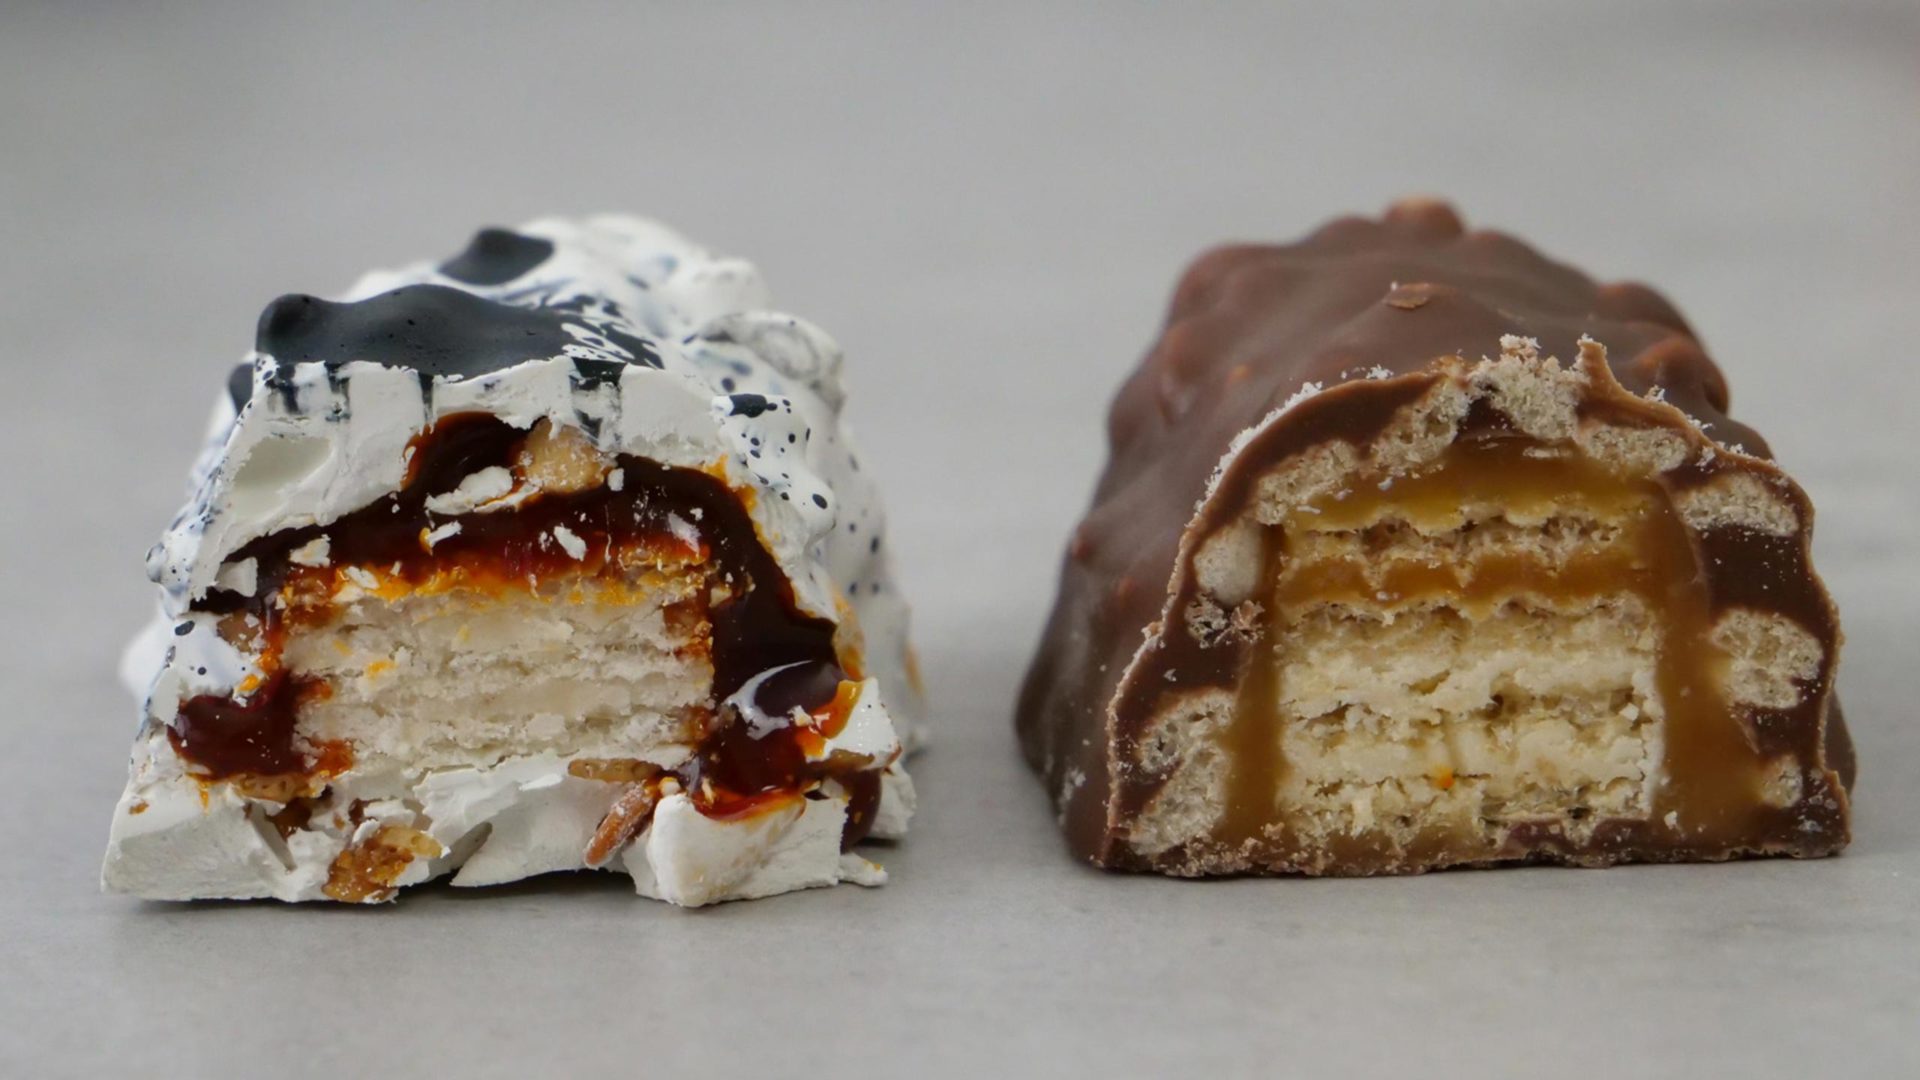 White and brown candy bar in cross section